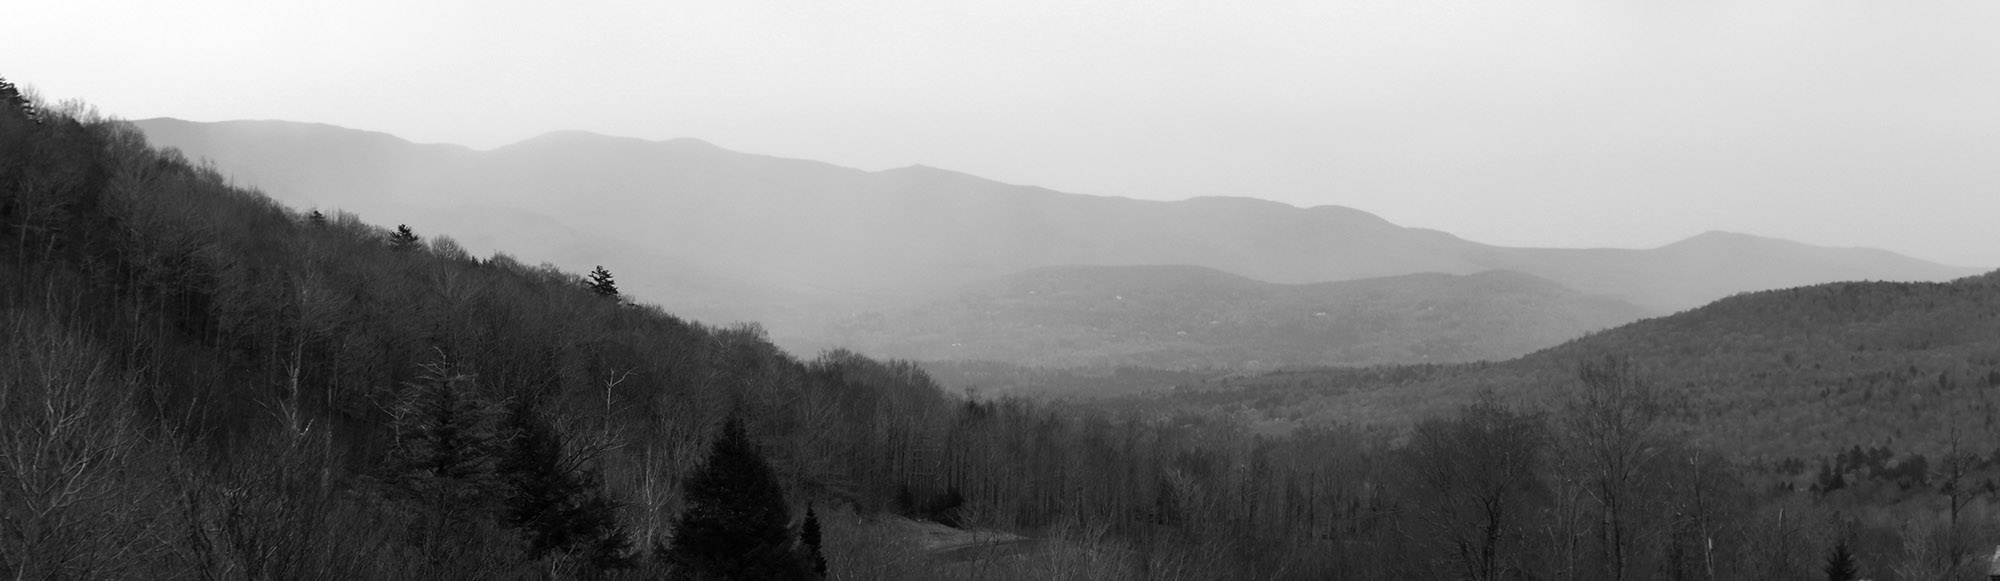 An image of peaks of the Green Mountains to the south of Stowe Mountain Resort in Vermont disappearing as a storm moves into the area.